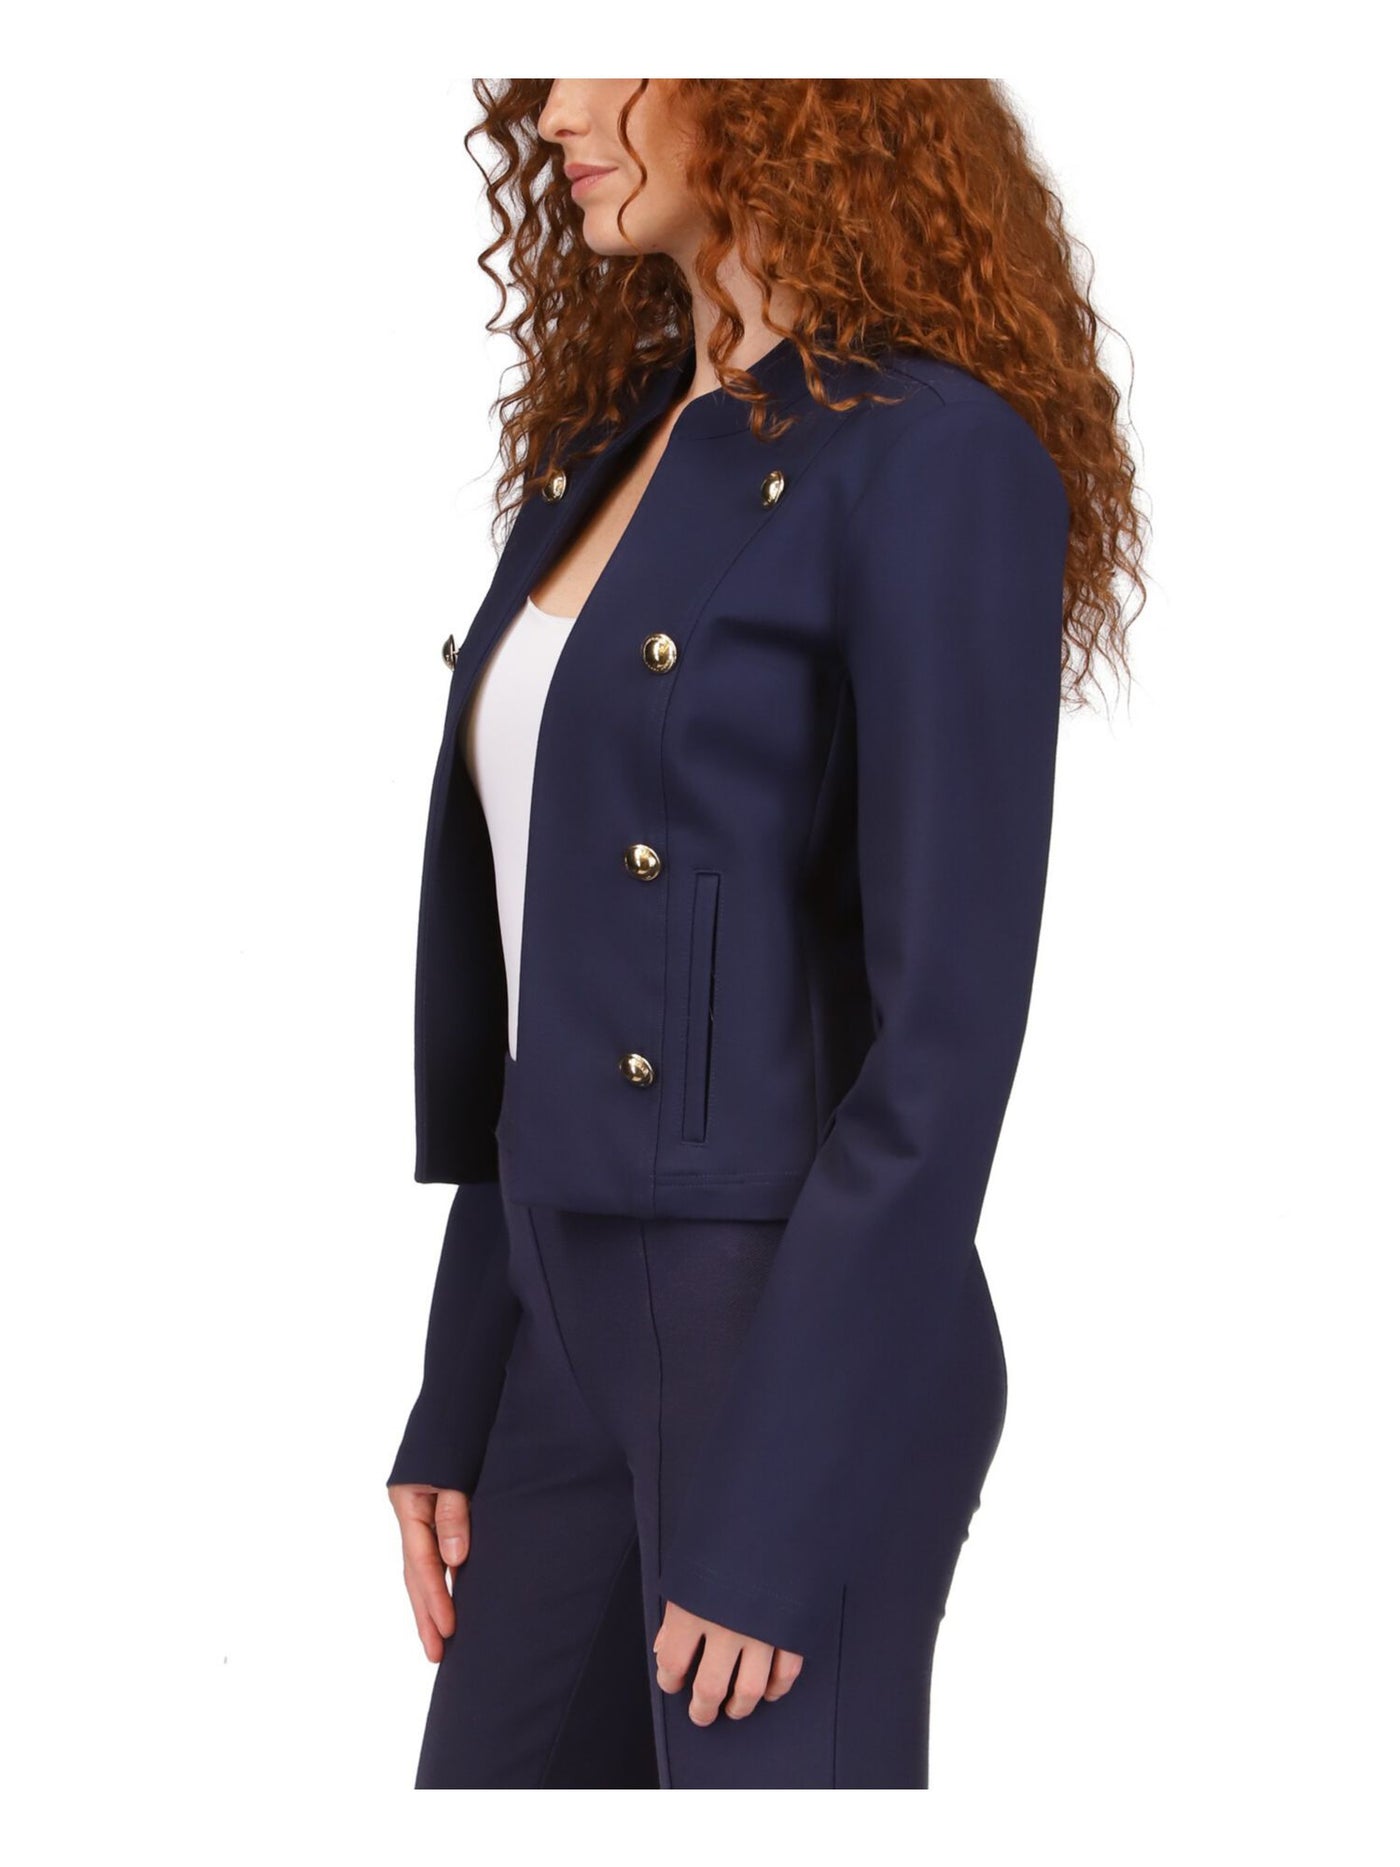 MICHAEL MICHAEL KORS Womens Navy Unlined Pocketed Button Detail Military Jacket S